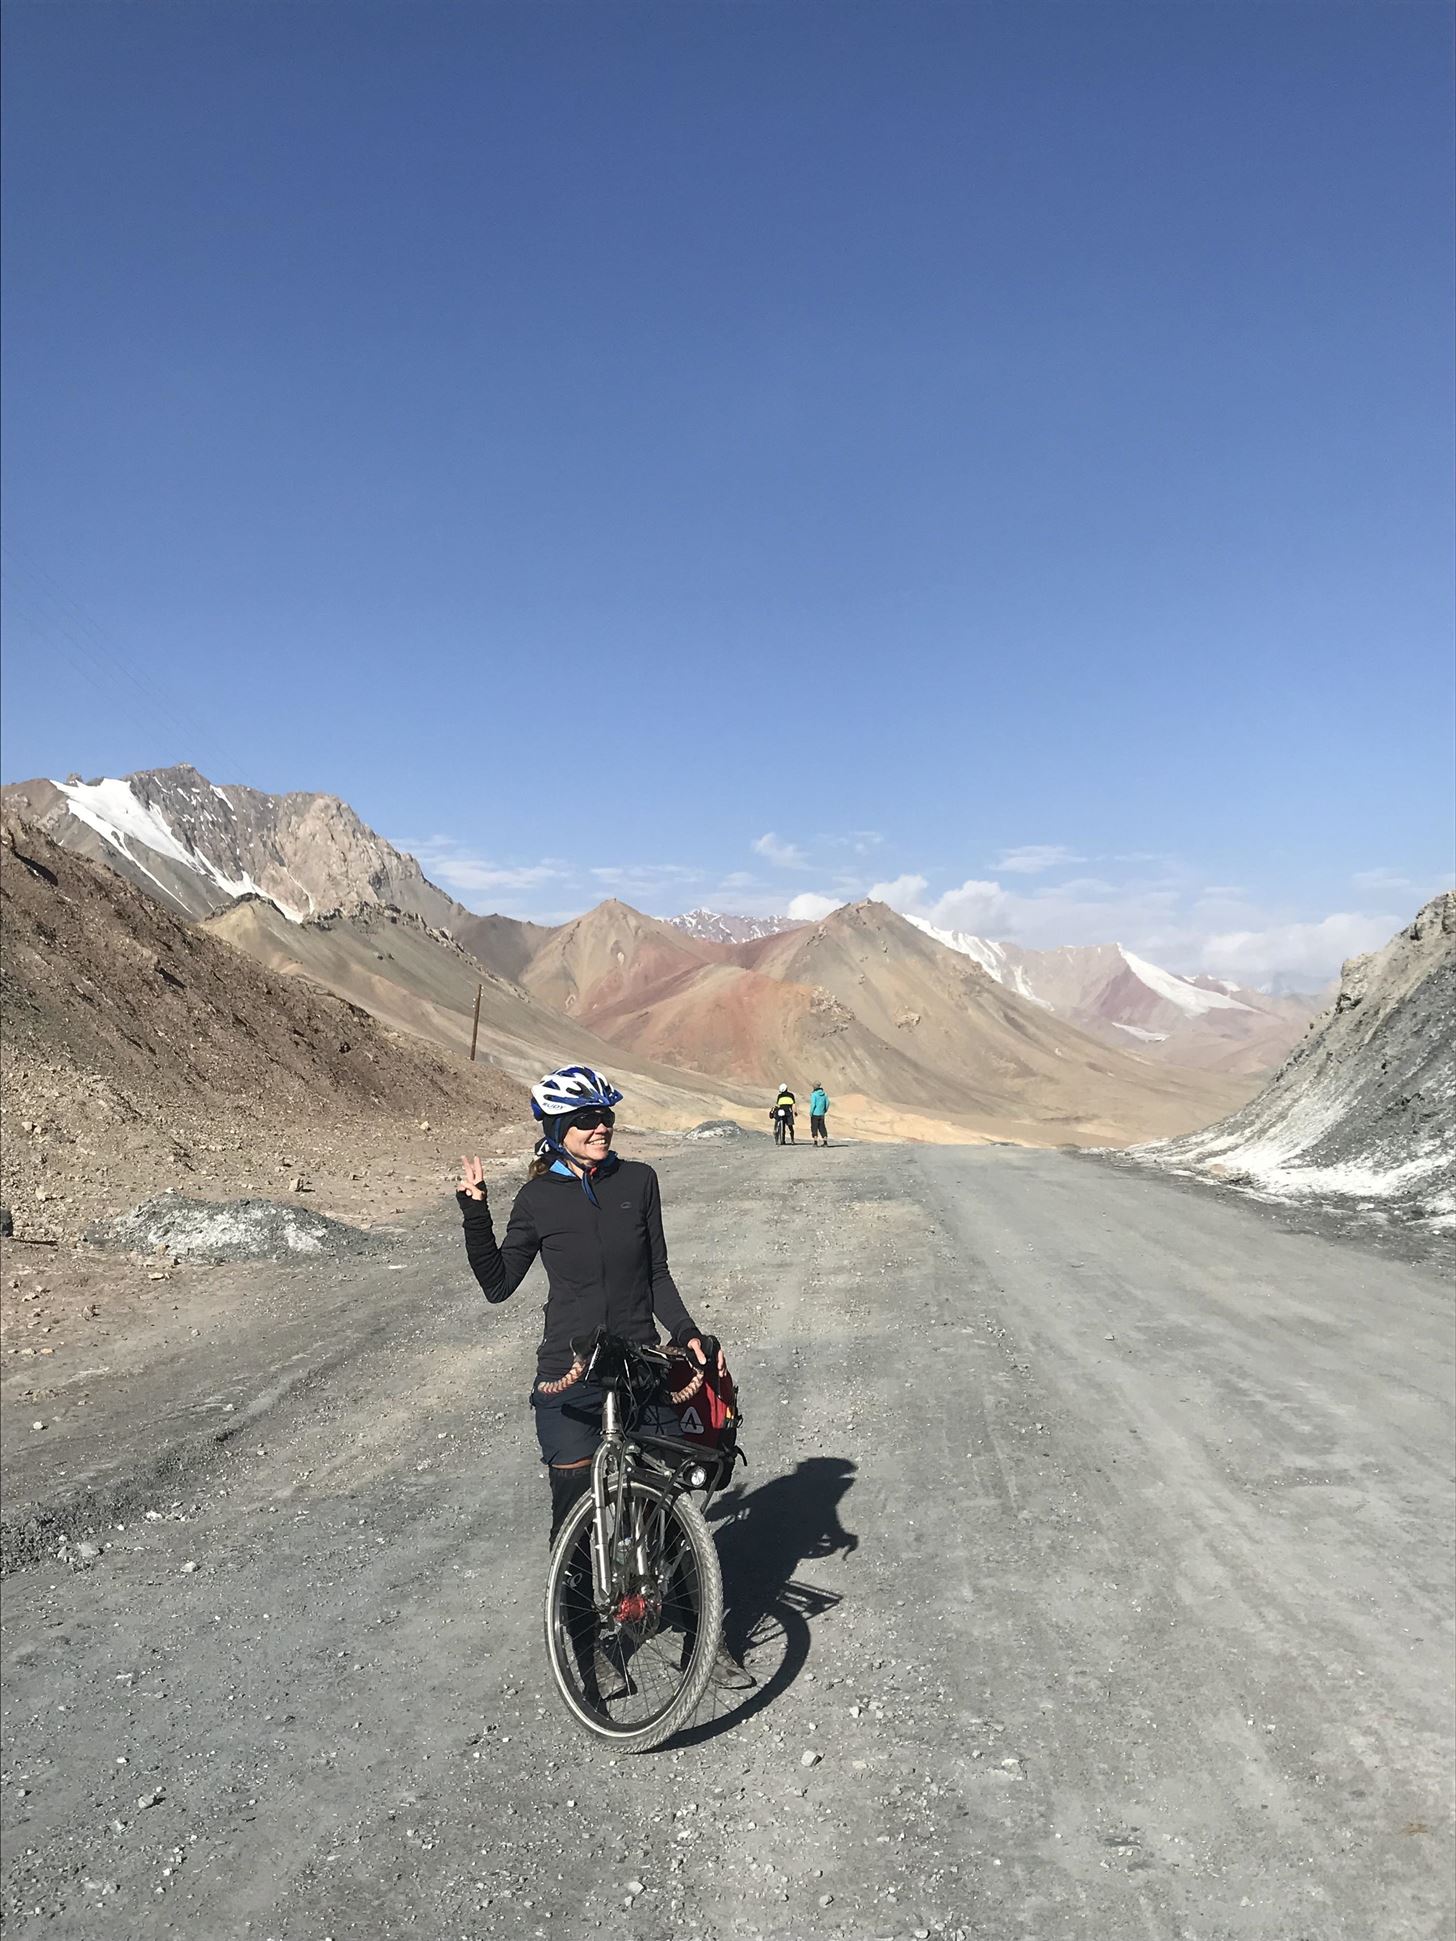 Our 3G Tower Is Broken: The Trials & Tribulations of Staying Connected on a 3-Month Bike Trip Across Central Asia